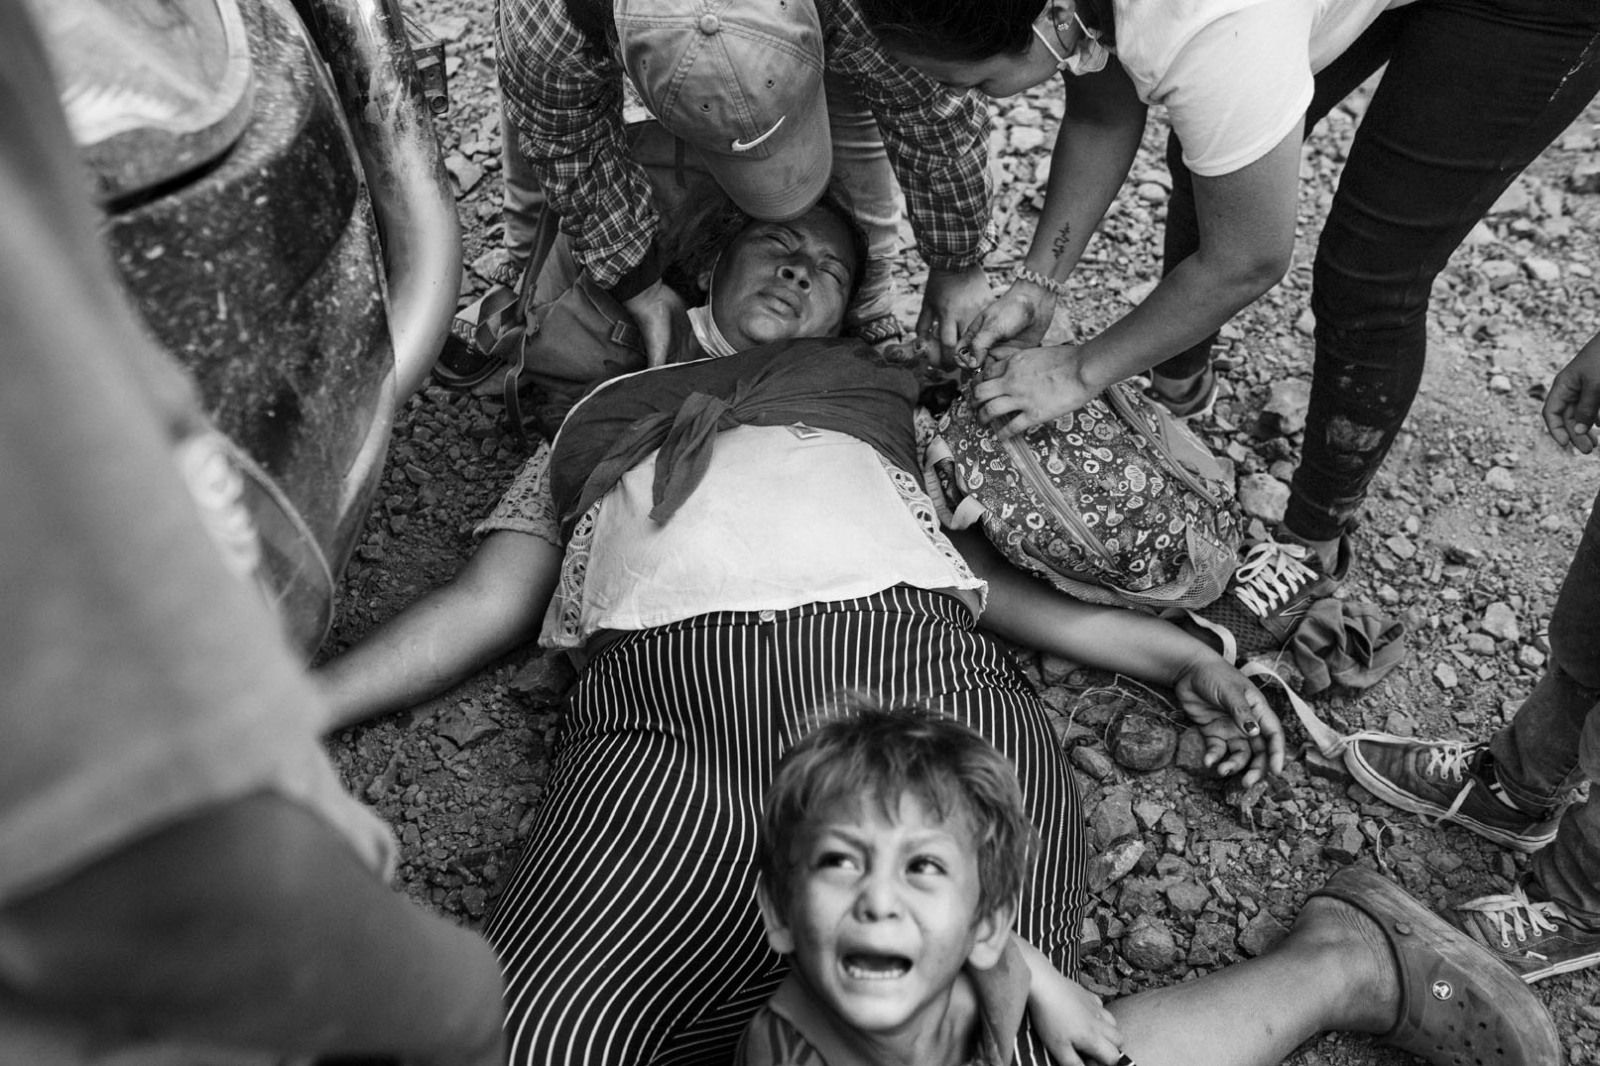 Jessica Rivas, 30, lays down as she faints during clashes between police officers and a ten thousand people caravan directed to the north in Vado Hondo, Guatemala, on January 18, 2021. Her 4-years-old son Isaac cries as his mother doesn't wake up.
The photographer has followed Jessica, Isaac, and her older son Juan David, 12, through Guatemala, and regularly visited them in Tapachula, Mexico, where they spent one month in a charity shelter. 
From Tapachula, the family moved north to Piedras Negras, a town bordering the United States in the Mexican Coahuila state. Fearing expulsion, Rivas decided to send Juan David alone across the border, a telephone number written in a paper in his pocket, to reunite with a family member in the United States. She is currently living with Isaac in Piedras Negras, determined to cross the border one day.
The photographer documented Jessica's story during the past year. Rivas agreed that her story would be published, hoping that American authorities, knowing her struggles, would grant her family asylum.